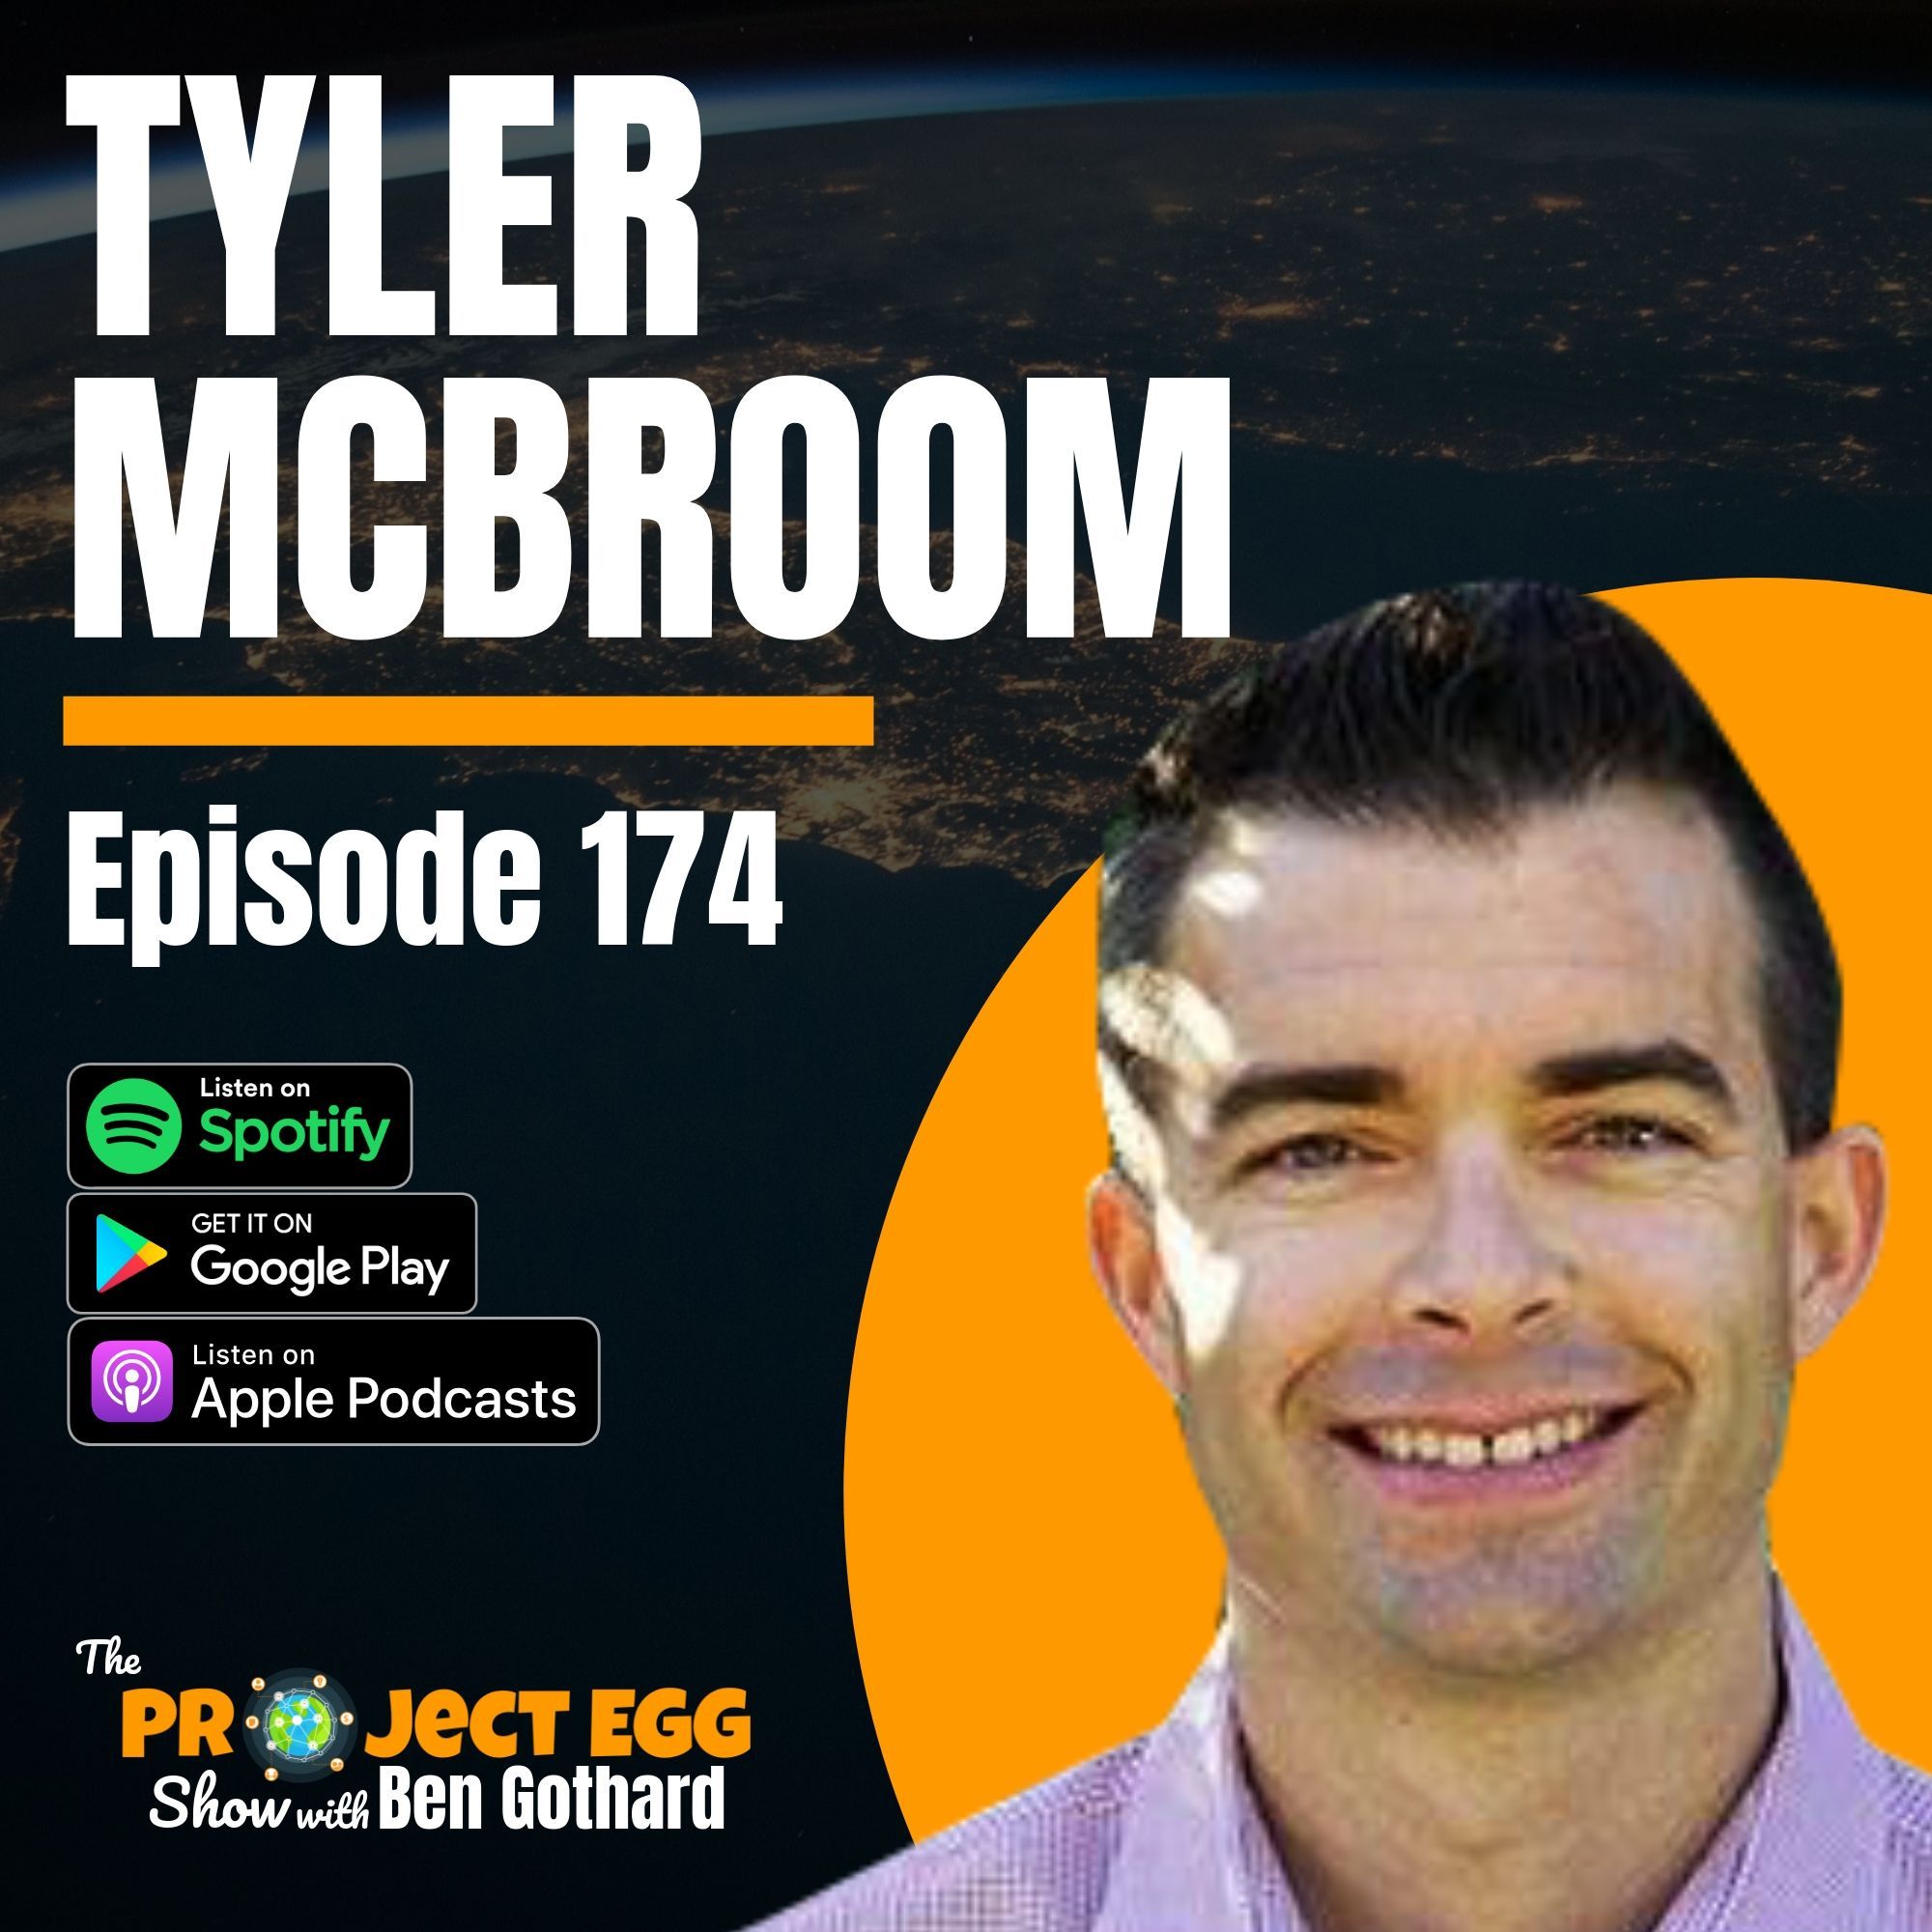 174 - Tyler McBroom by The Project EGG Show: Entrepreneurs Gathering for  Growth | Conversations That Change The World